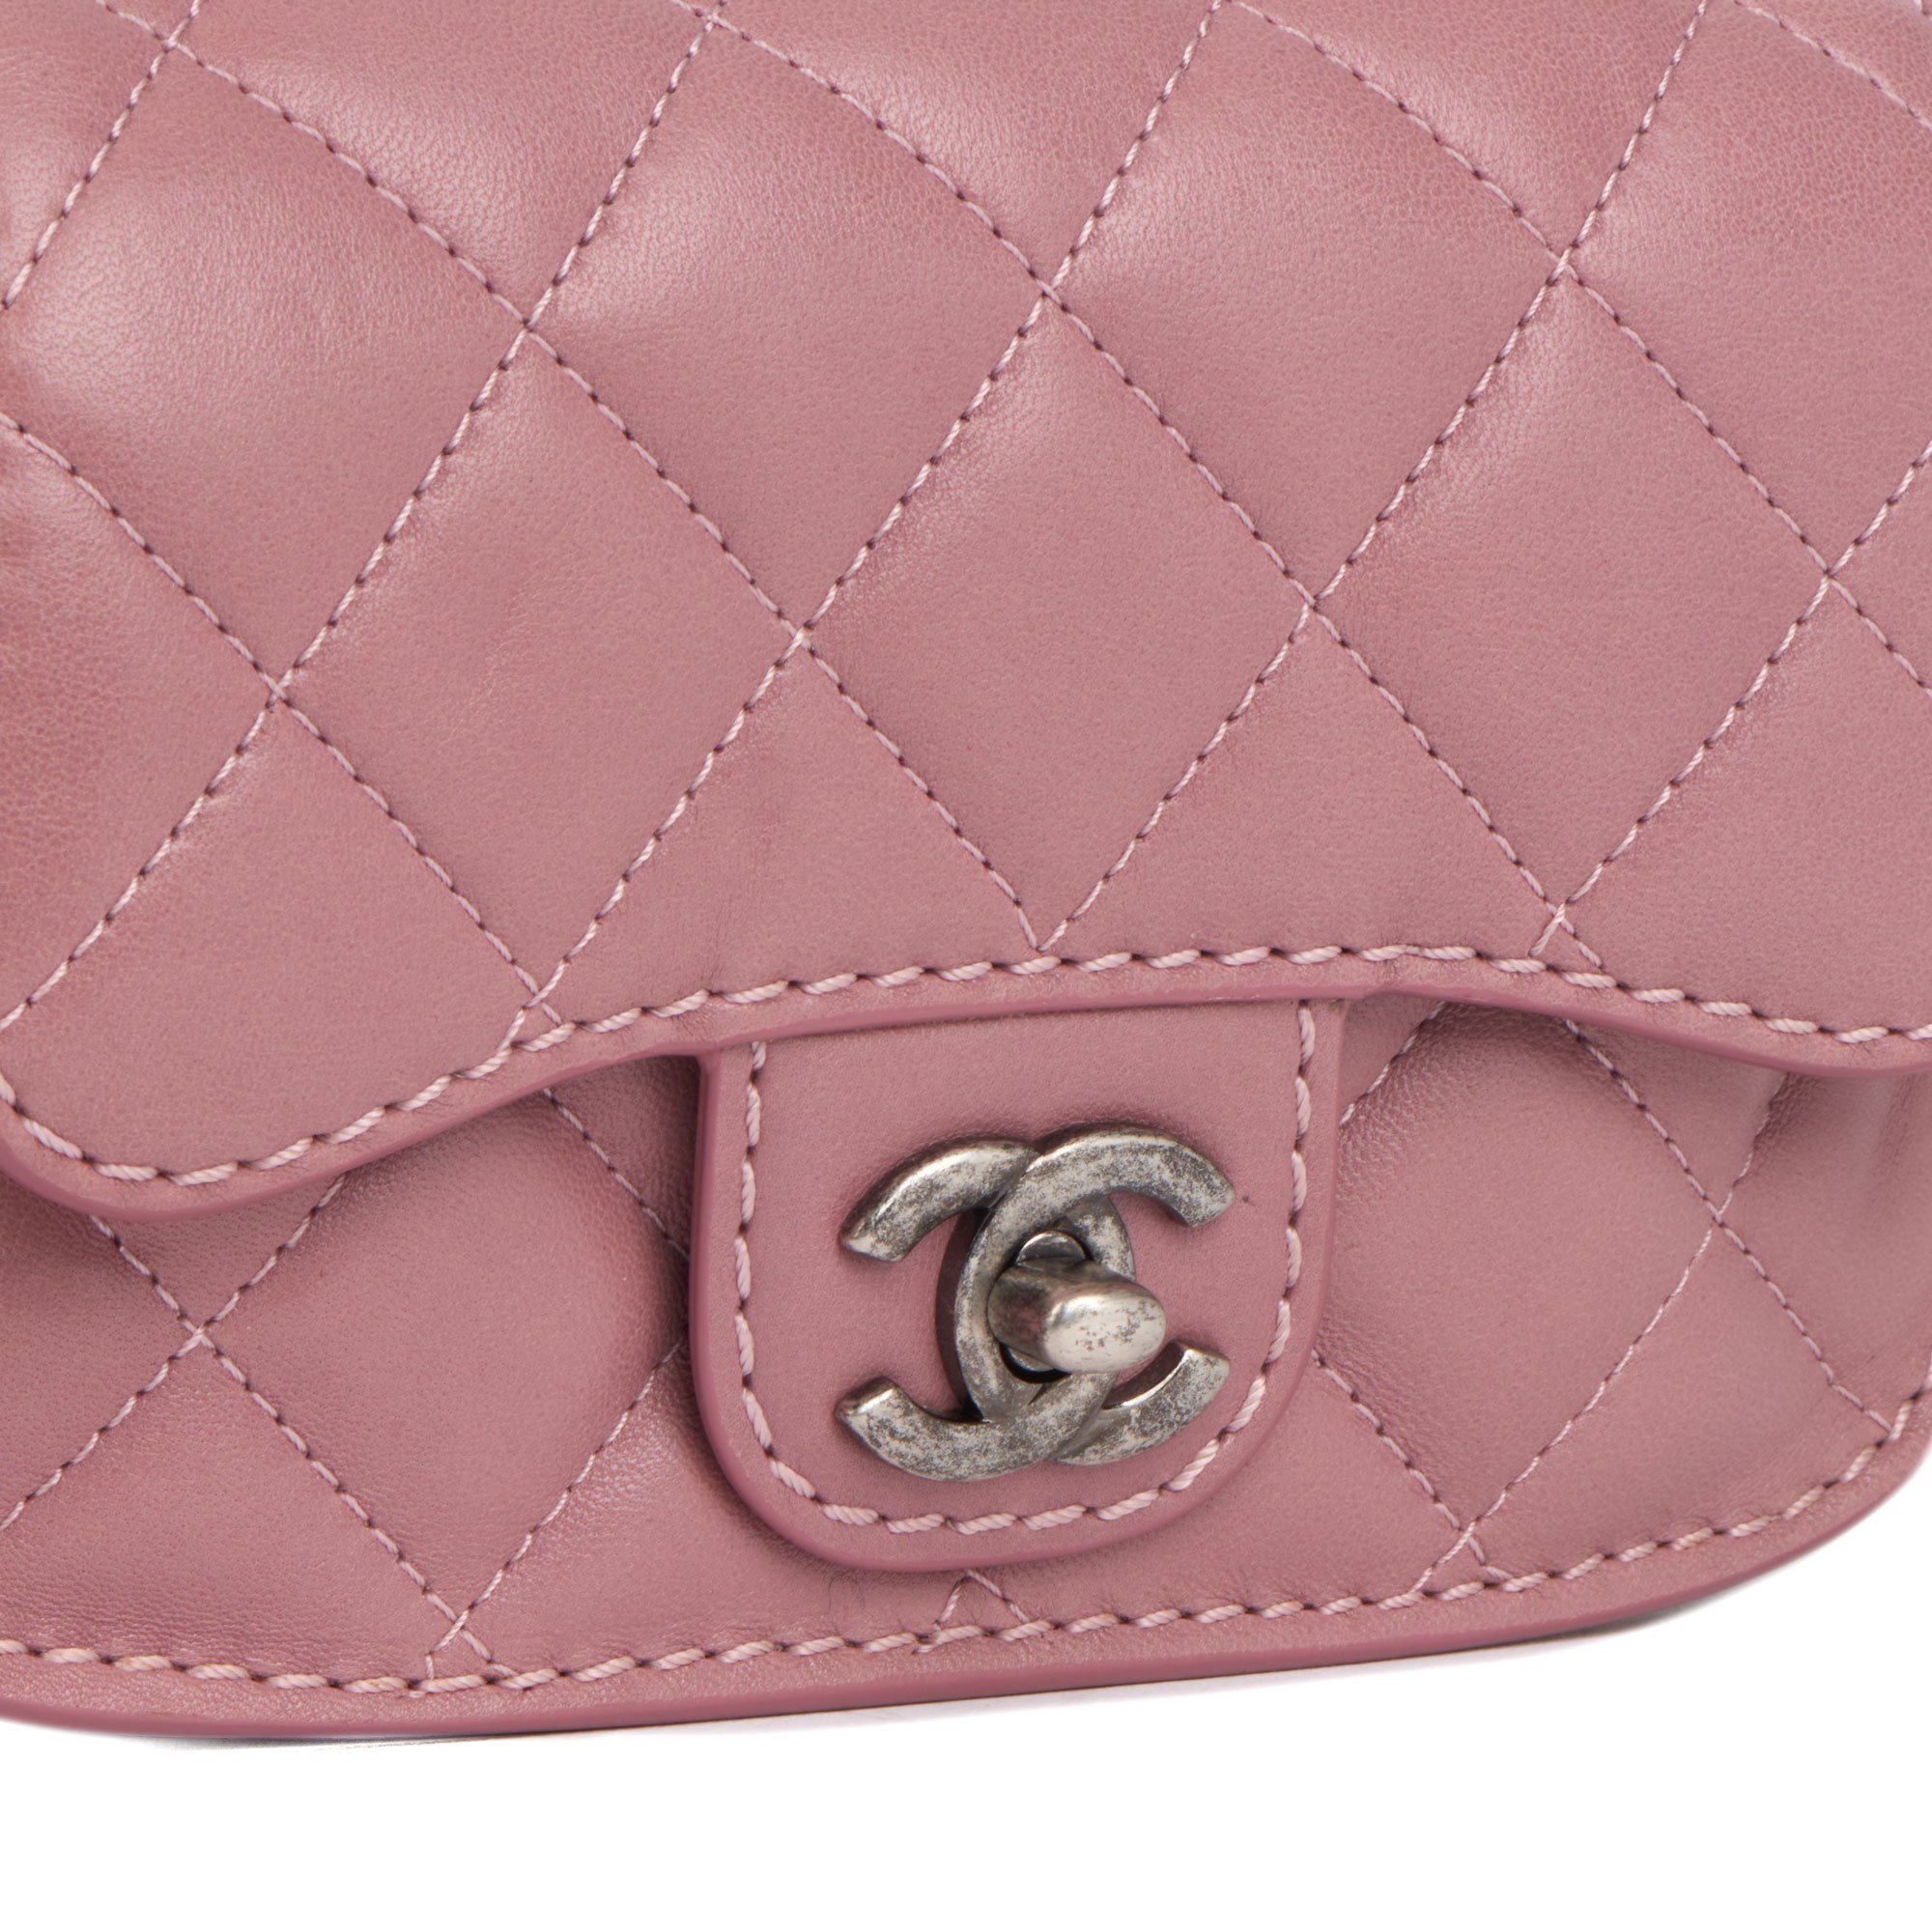 Chanel Mauve Quilted Lambskin Mini Flap Bag